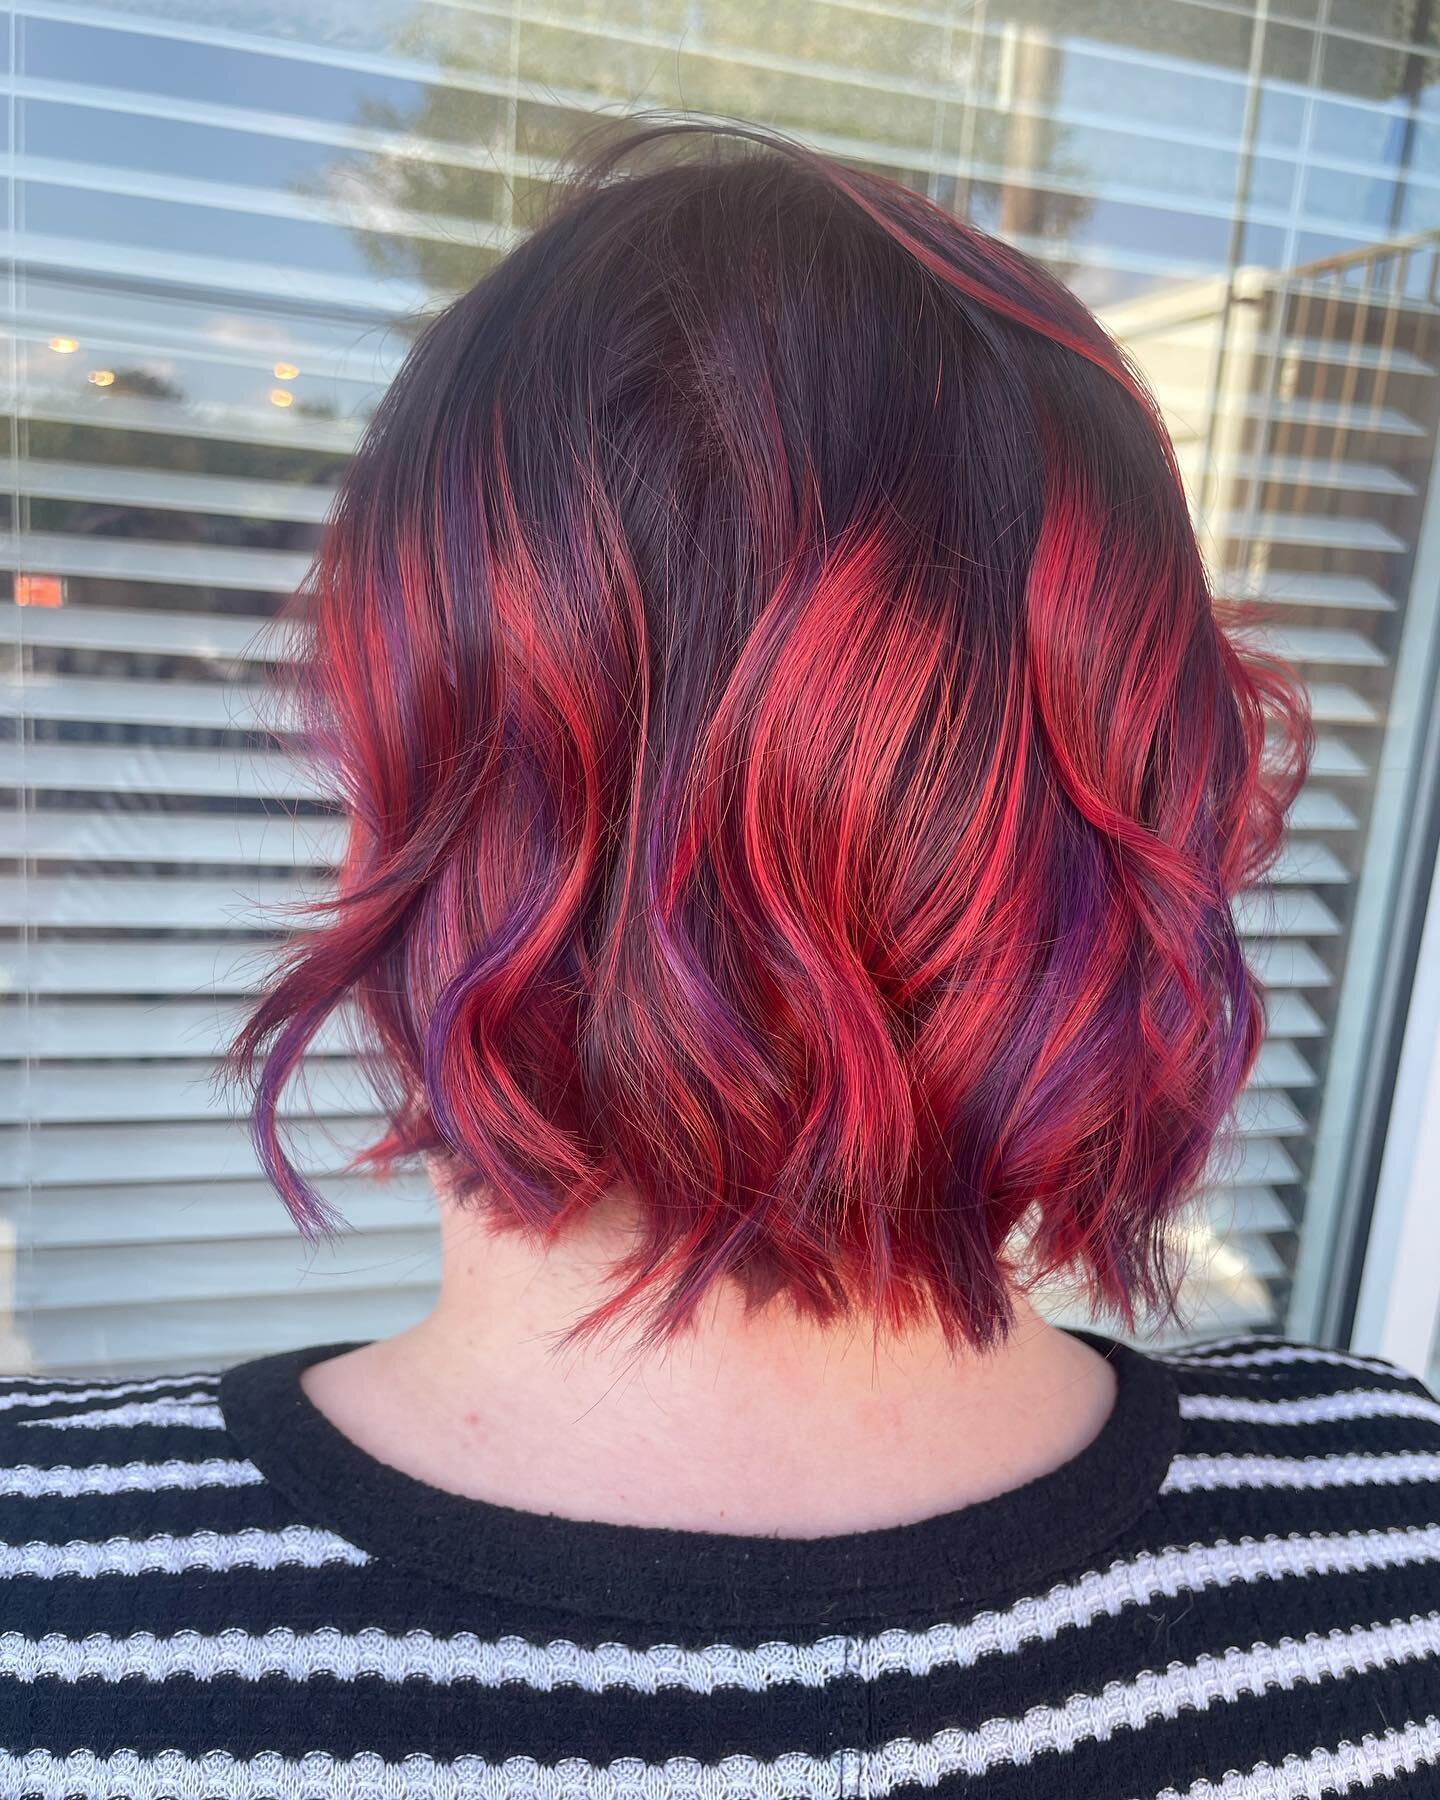 Fall Hair is the best 🍁🍂👻
Hair by Alyssa Swope 
@witchy.hairdoctor 

Call us at 856.624.9140 to book your Fall makeover. 

#goldwell #goldwellcolor #goldwellapprovedus #goldwellcolorance #goldwellpurepigments #goldwelltopchic #goldwellsalon #njsal